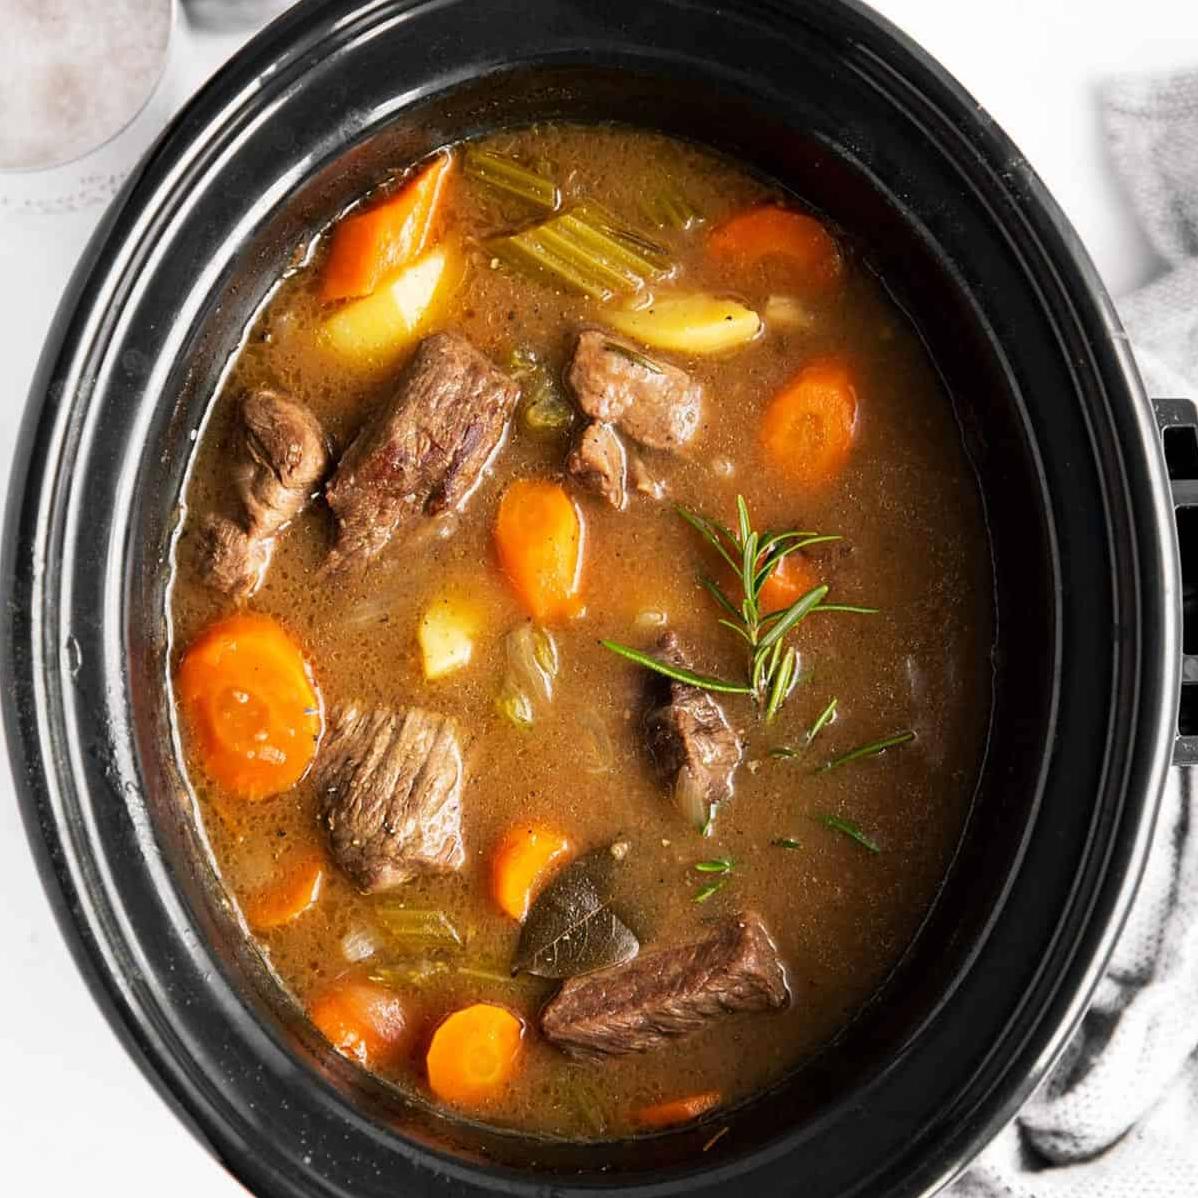  Satisfy your hunger with this hearty and delicious Irish stew.